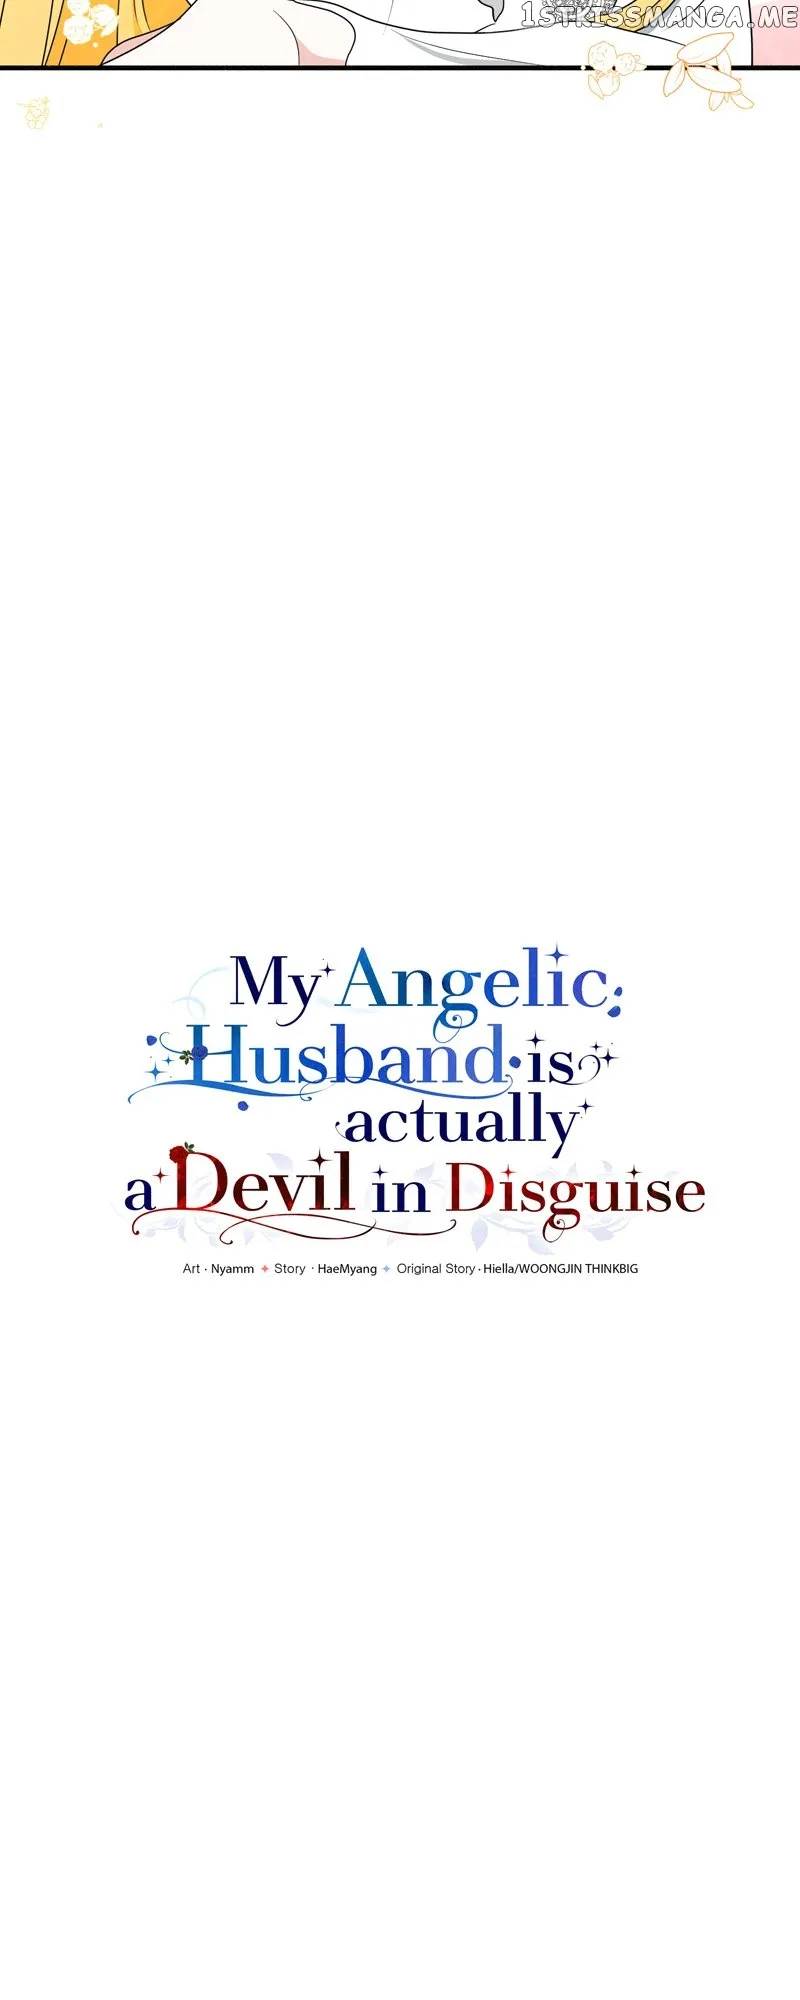 My Angelic Husband is actually a Devil in Disguise chapter 4